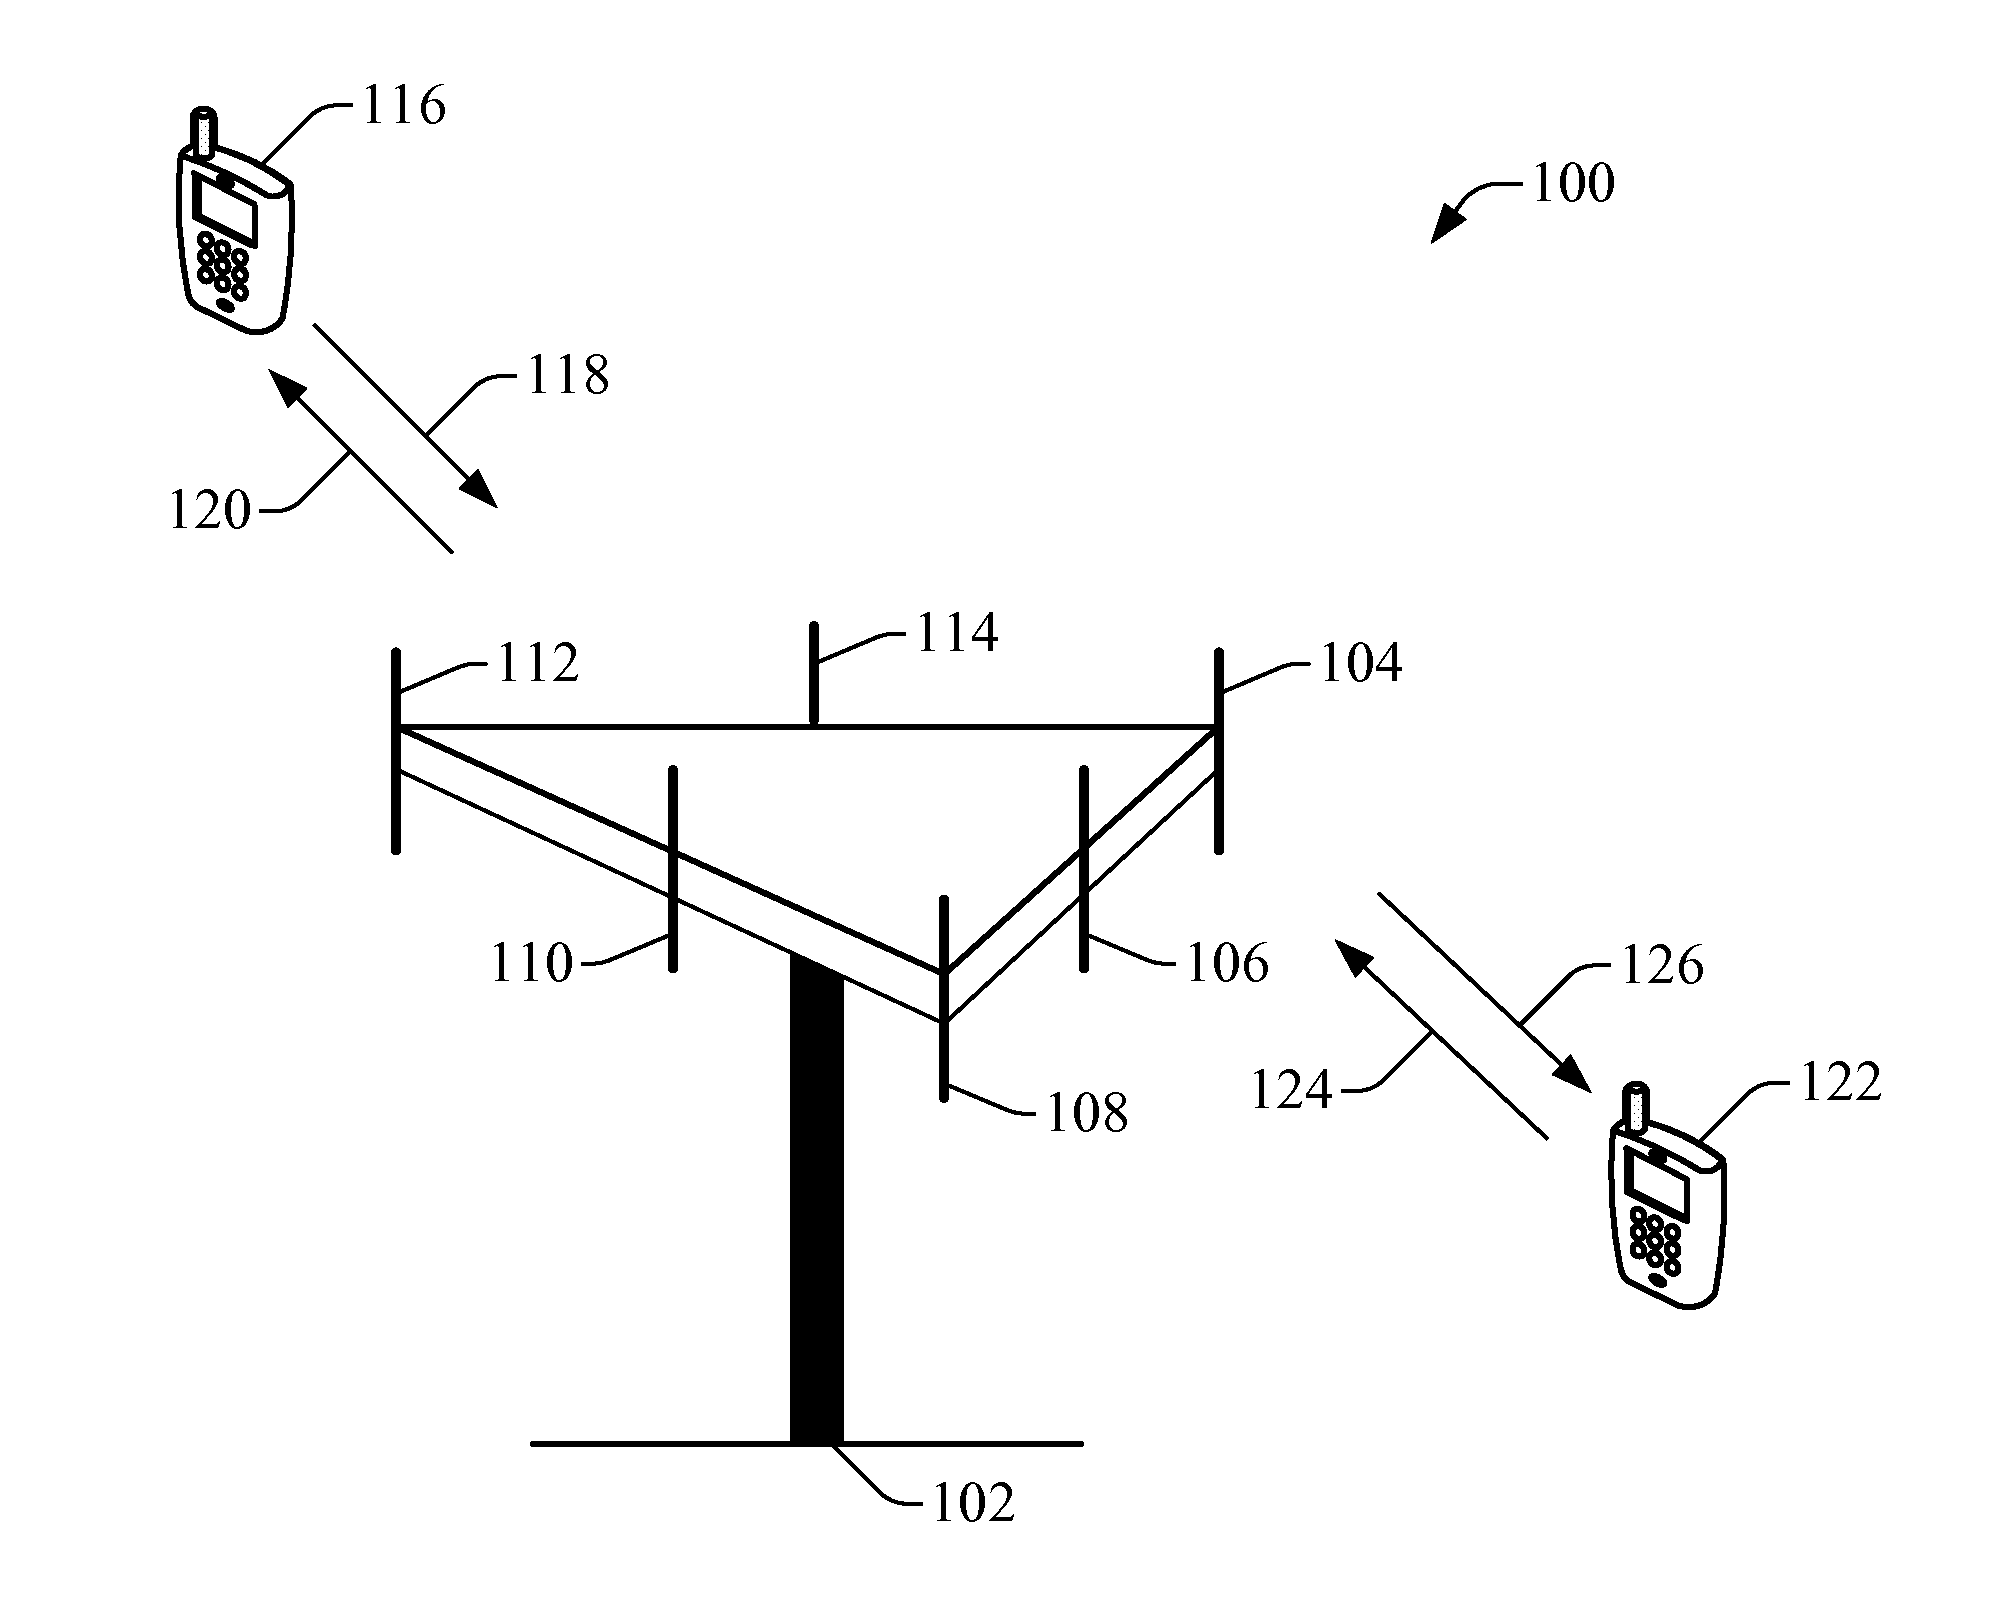 Positioning reference signals in a telecommunication system